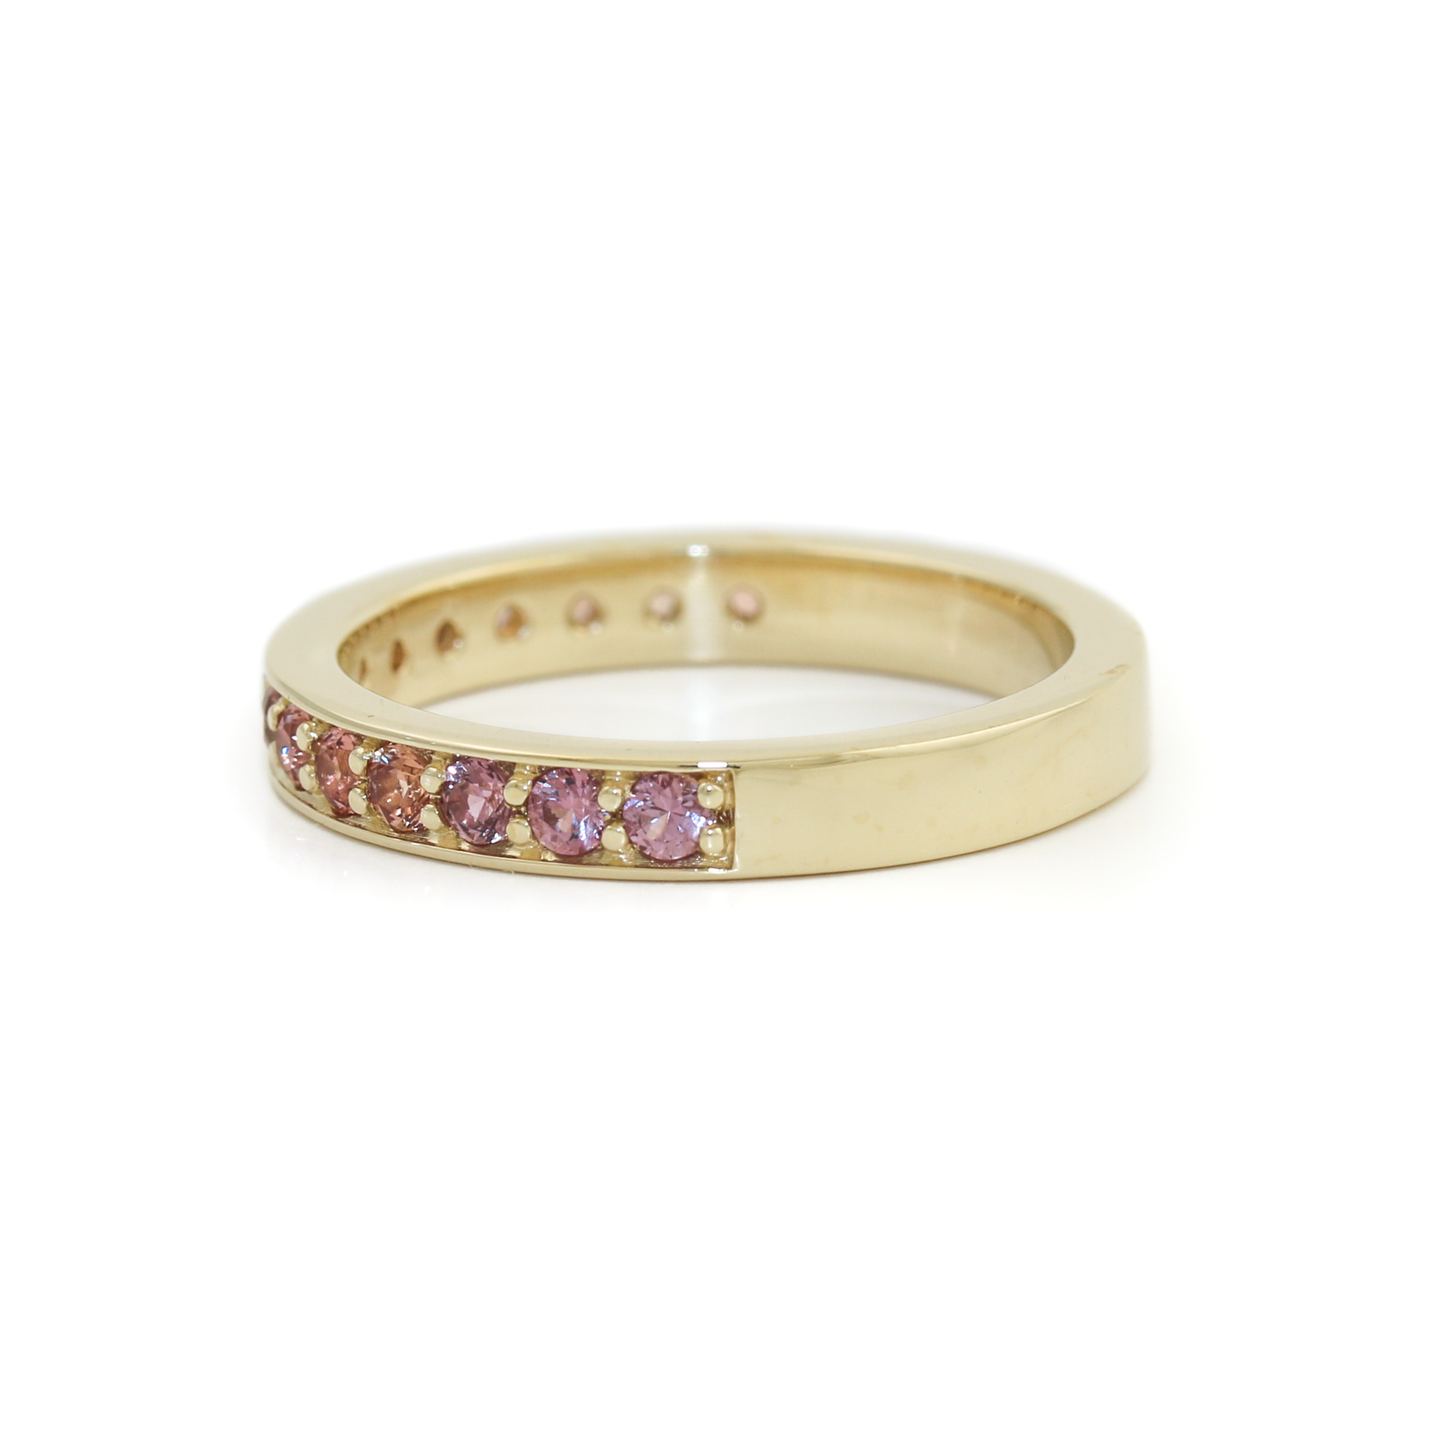 Introducing our stunning 14k Gold x Pave Gradient Padparadscha Sapphire Band in lustrous 14k gold with a dazzling pave setting. 